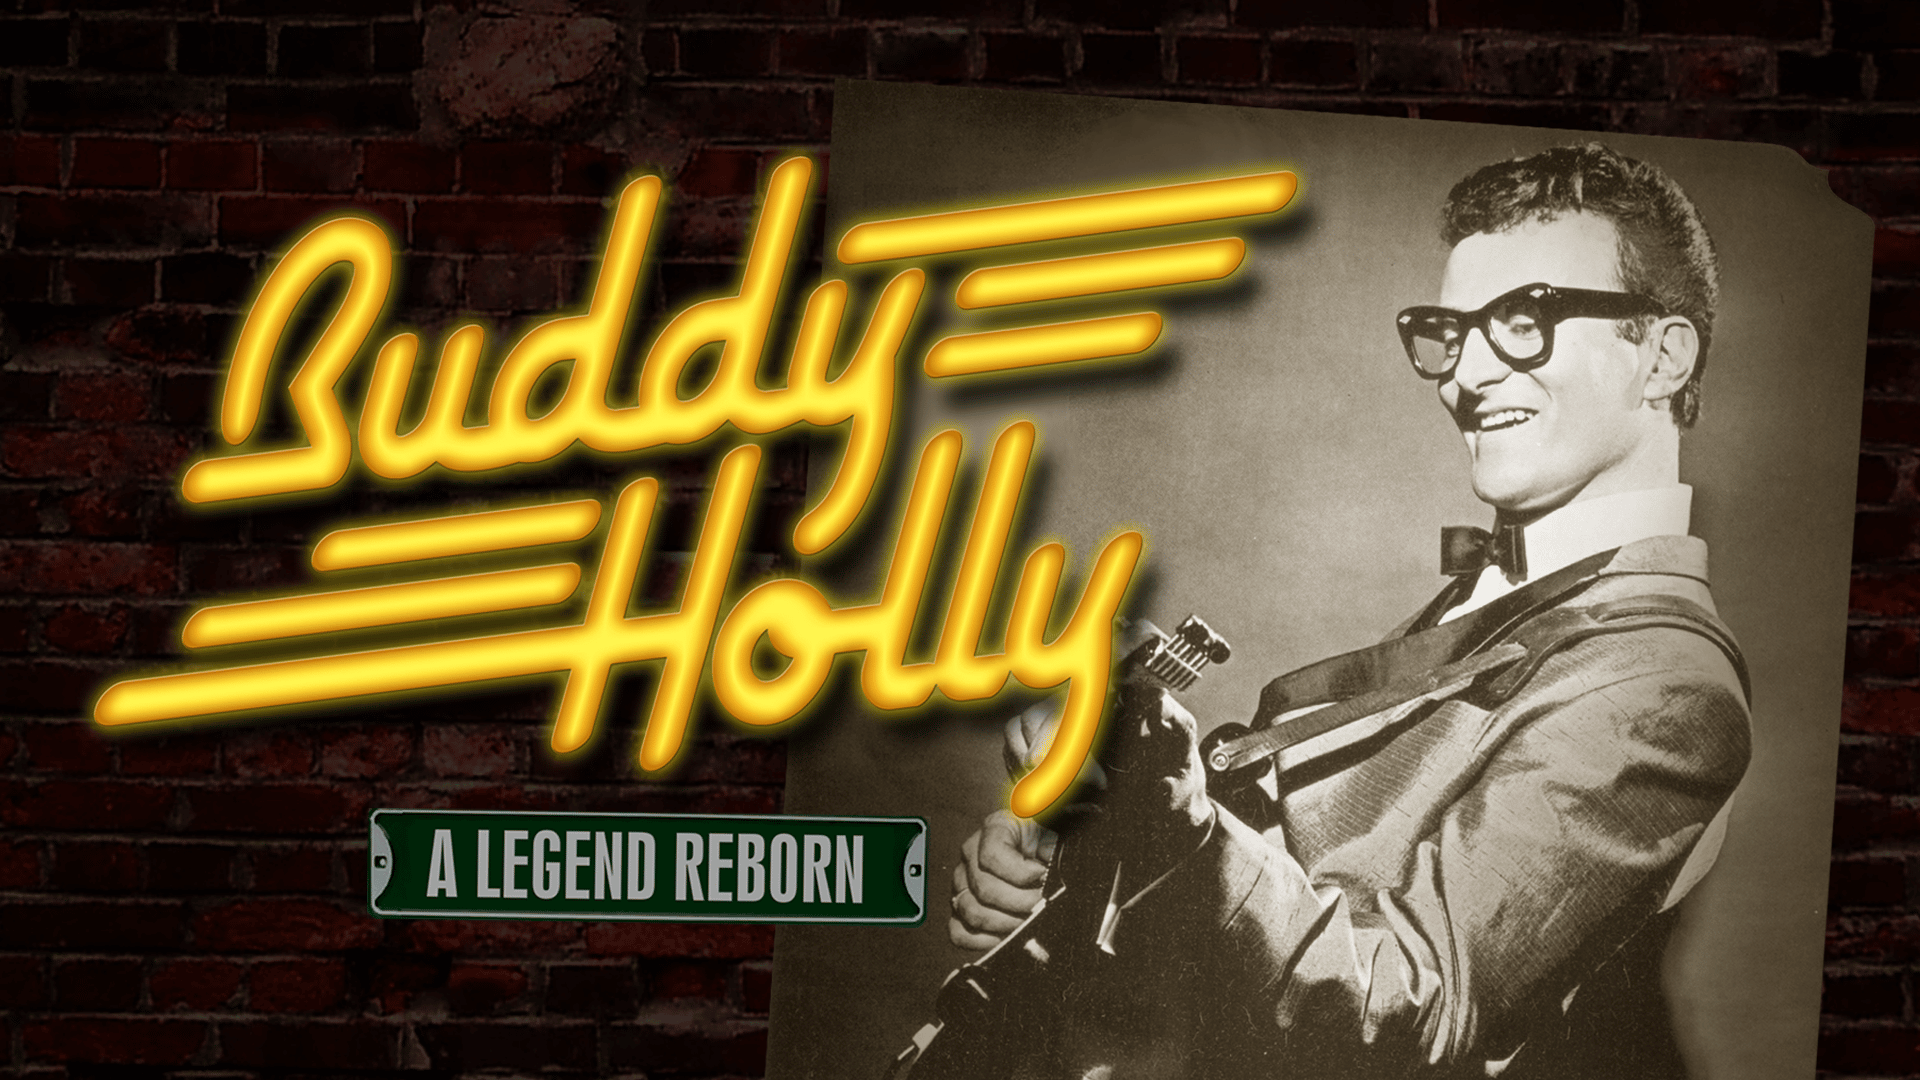 BUDDY HOLLY A LEGEND REBORN - in neon yellow letters, with an old black and white image of Buddy playing the guitar